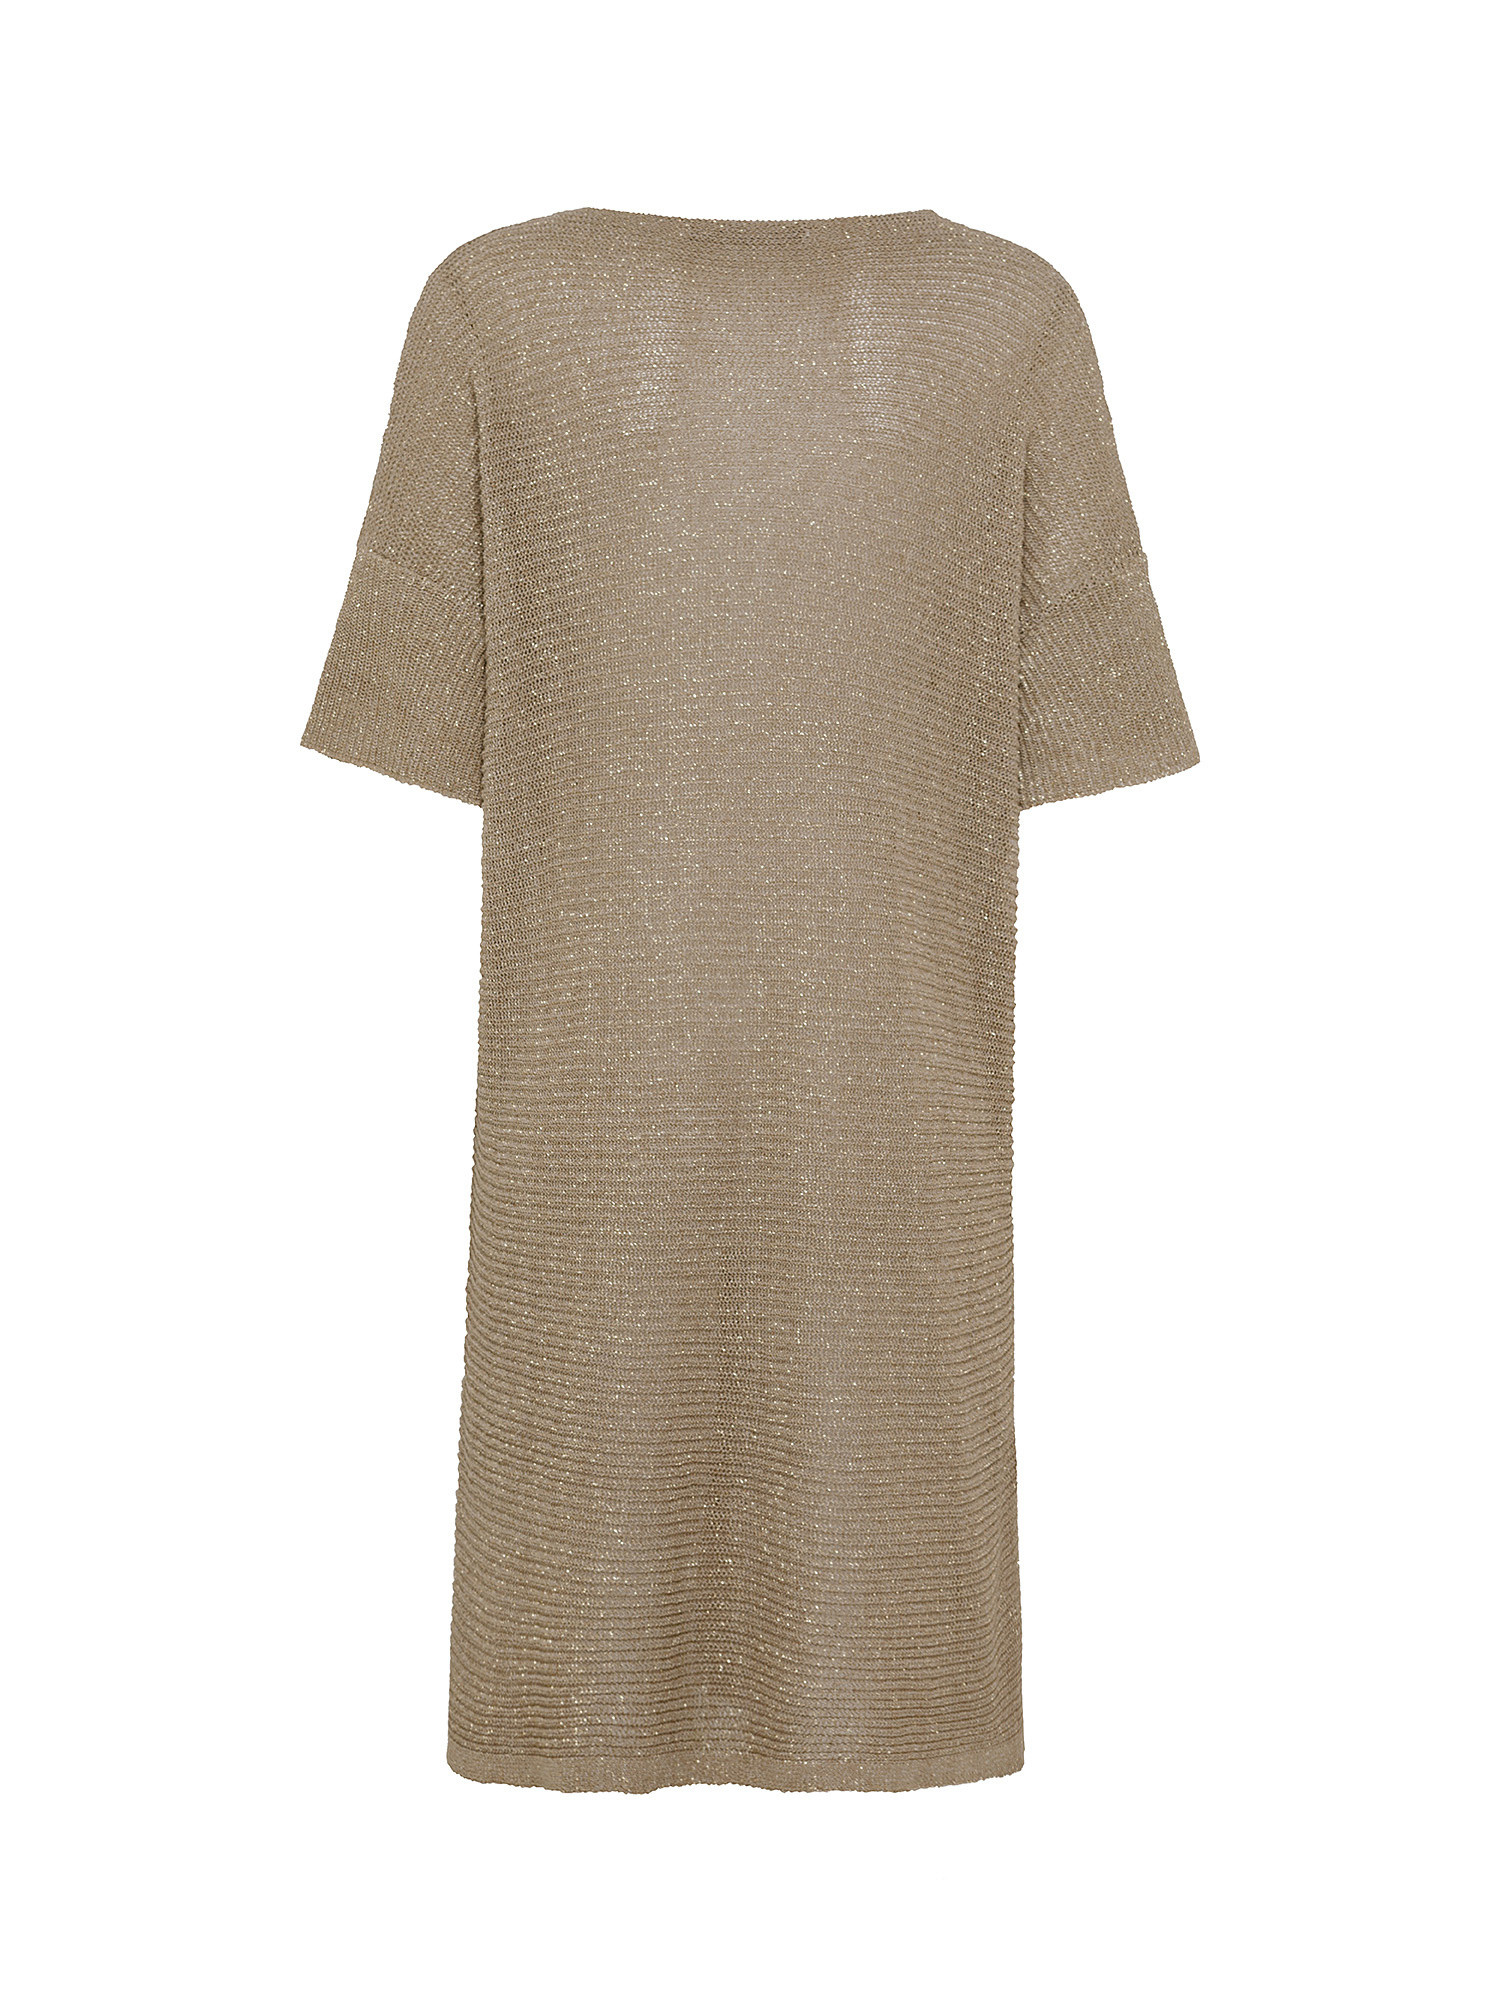 Knitted dress, Taupe Grey, large image number 1